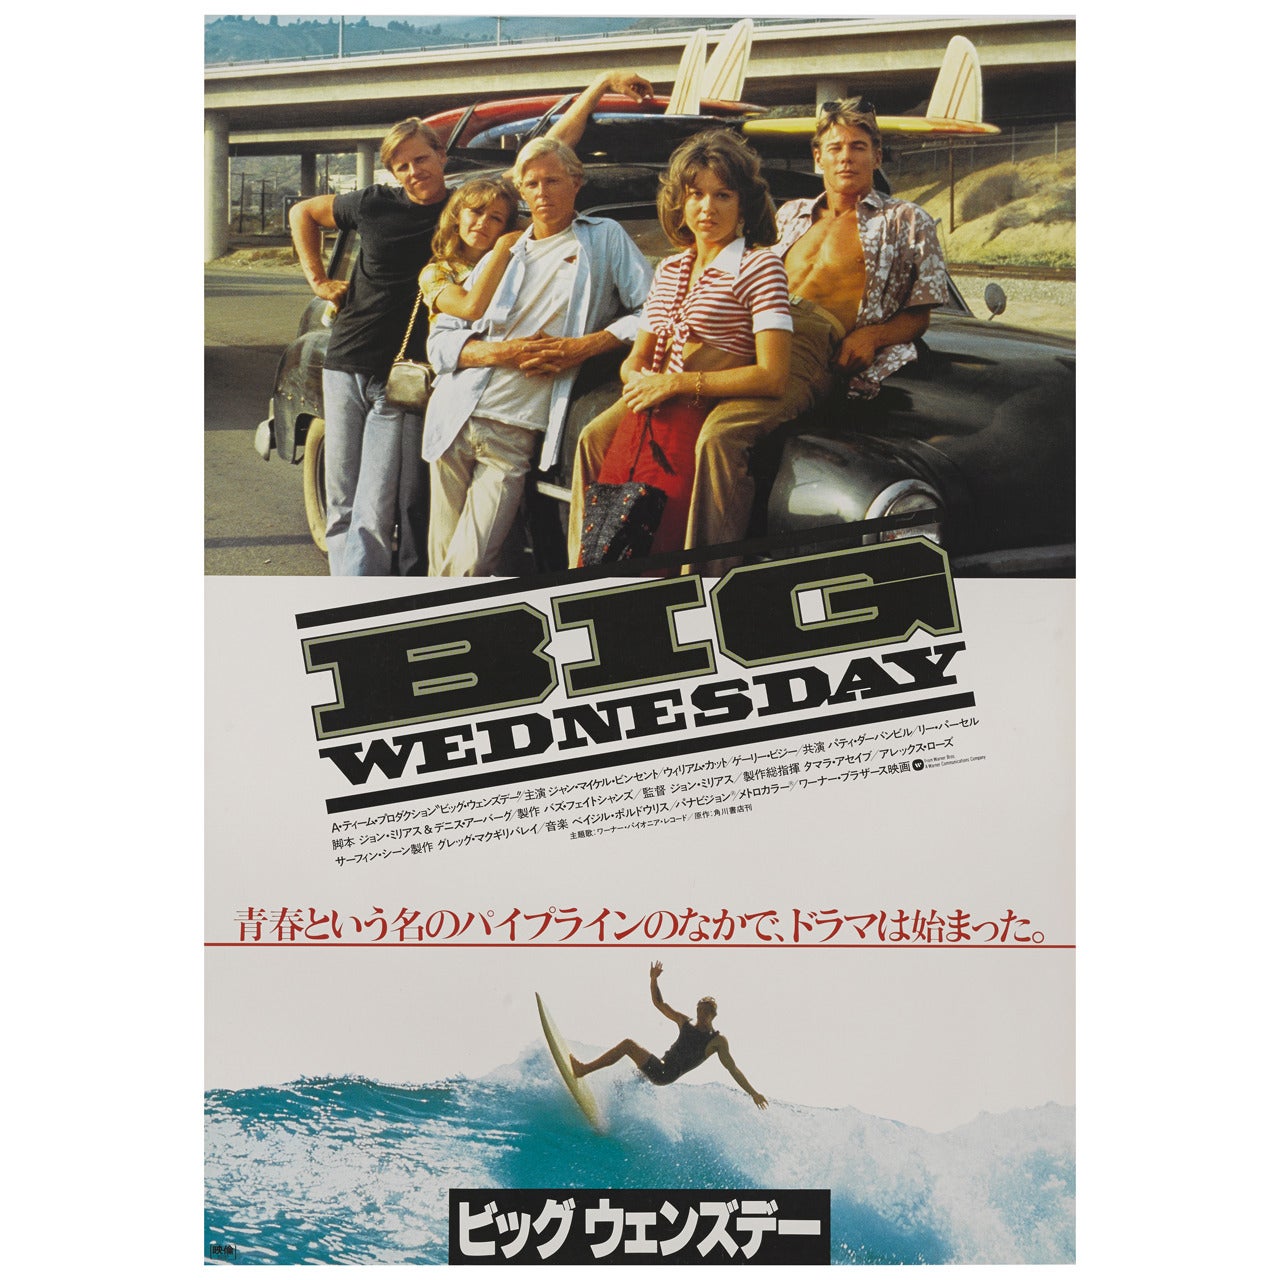 "Big Wednesday" Japanese Movie Poster For Sale